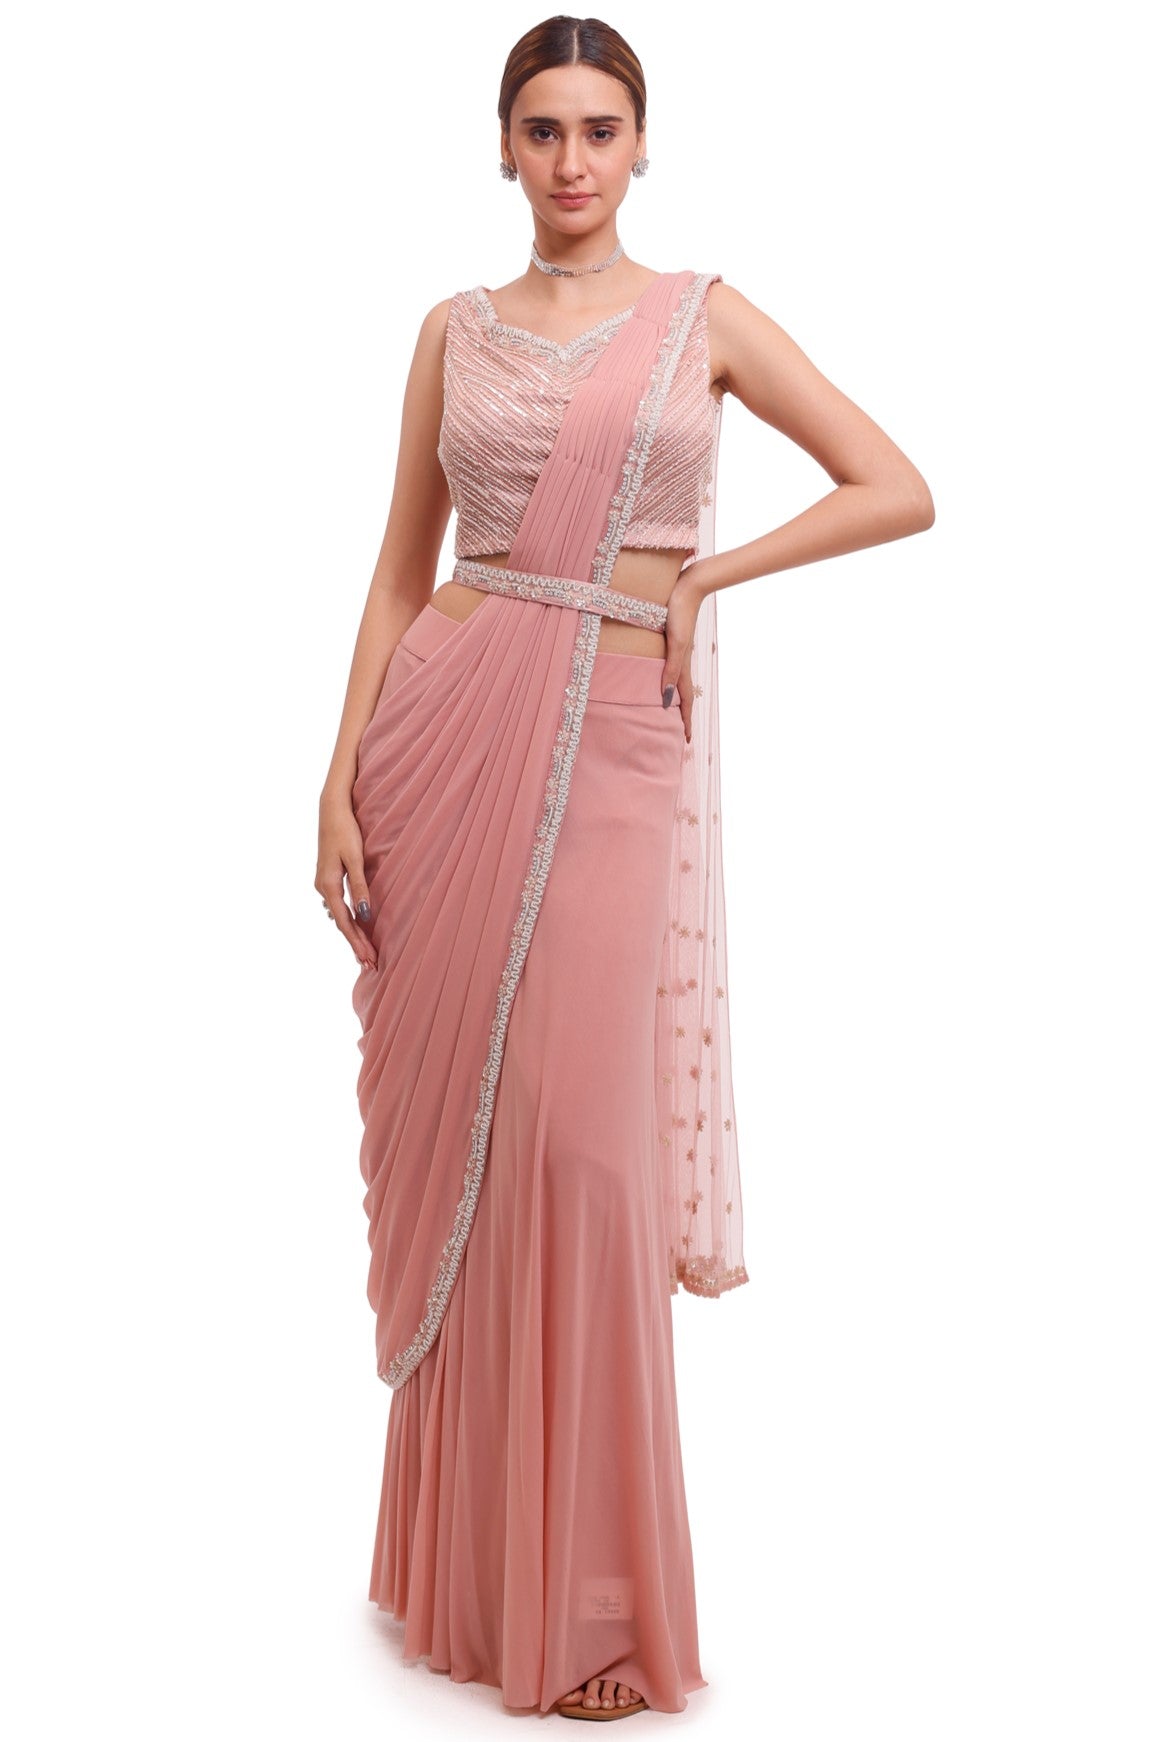 Buy stunning light pink draped lycra saree online in USA with embellished blouse. Look your best at parties and weddings in beautiful designer sarees, embroidered sarees, handwoven sarees, silk sarees, organza saris from Pure Elegance Indian saree store in USA.-full view